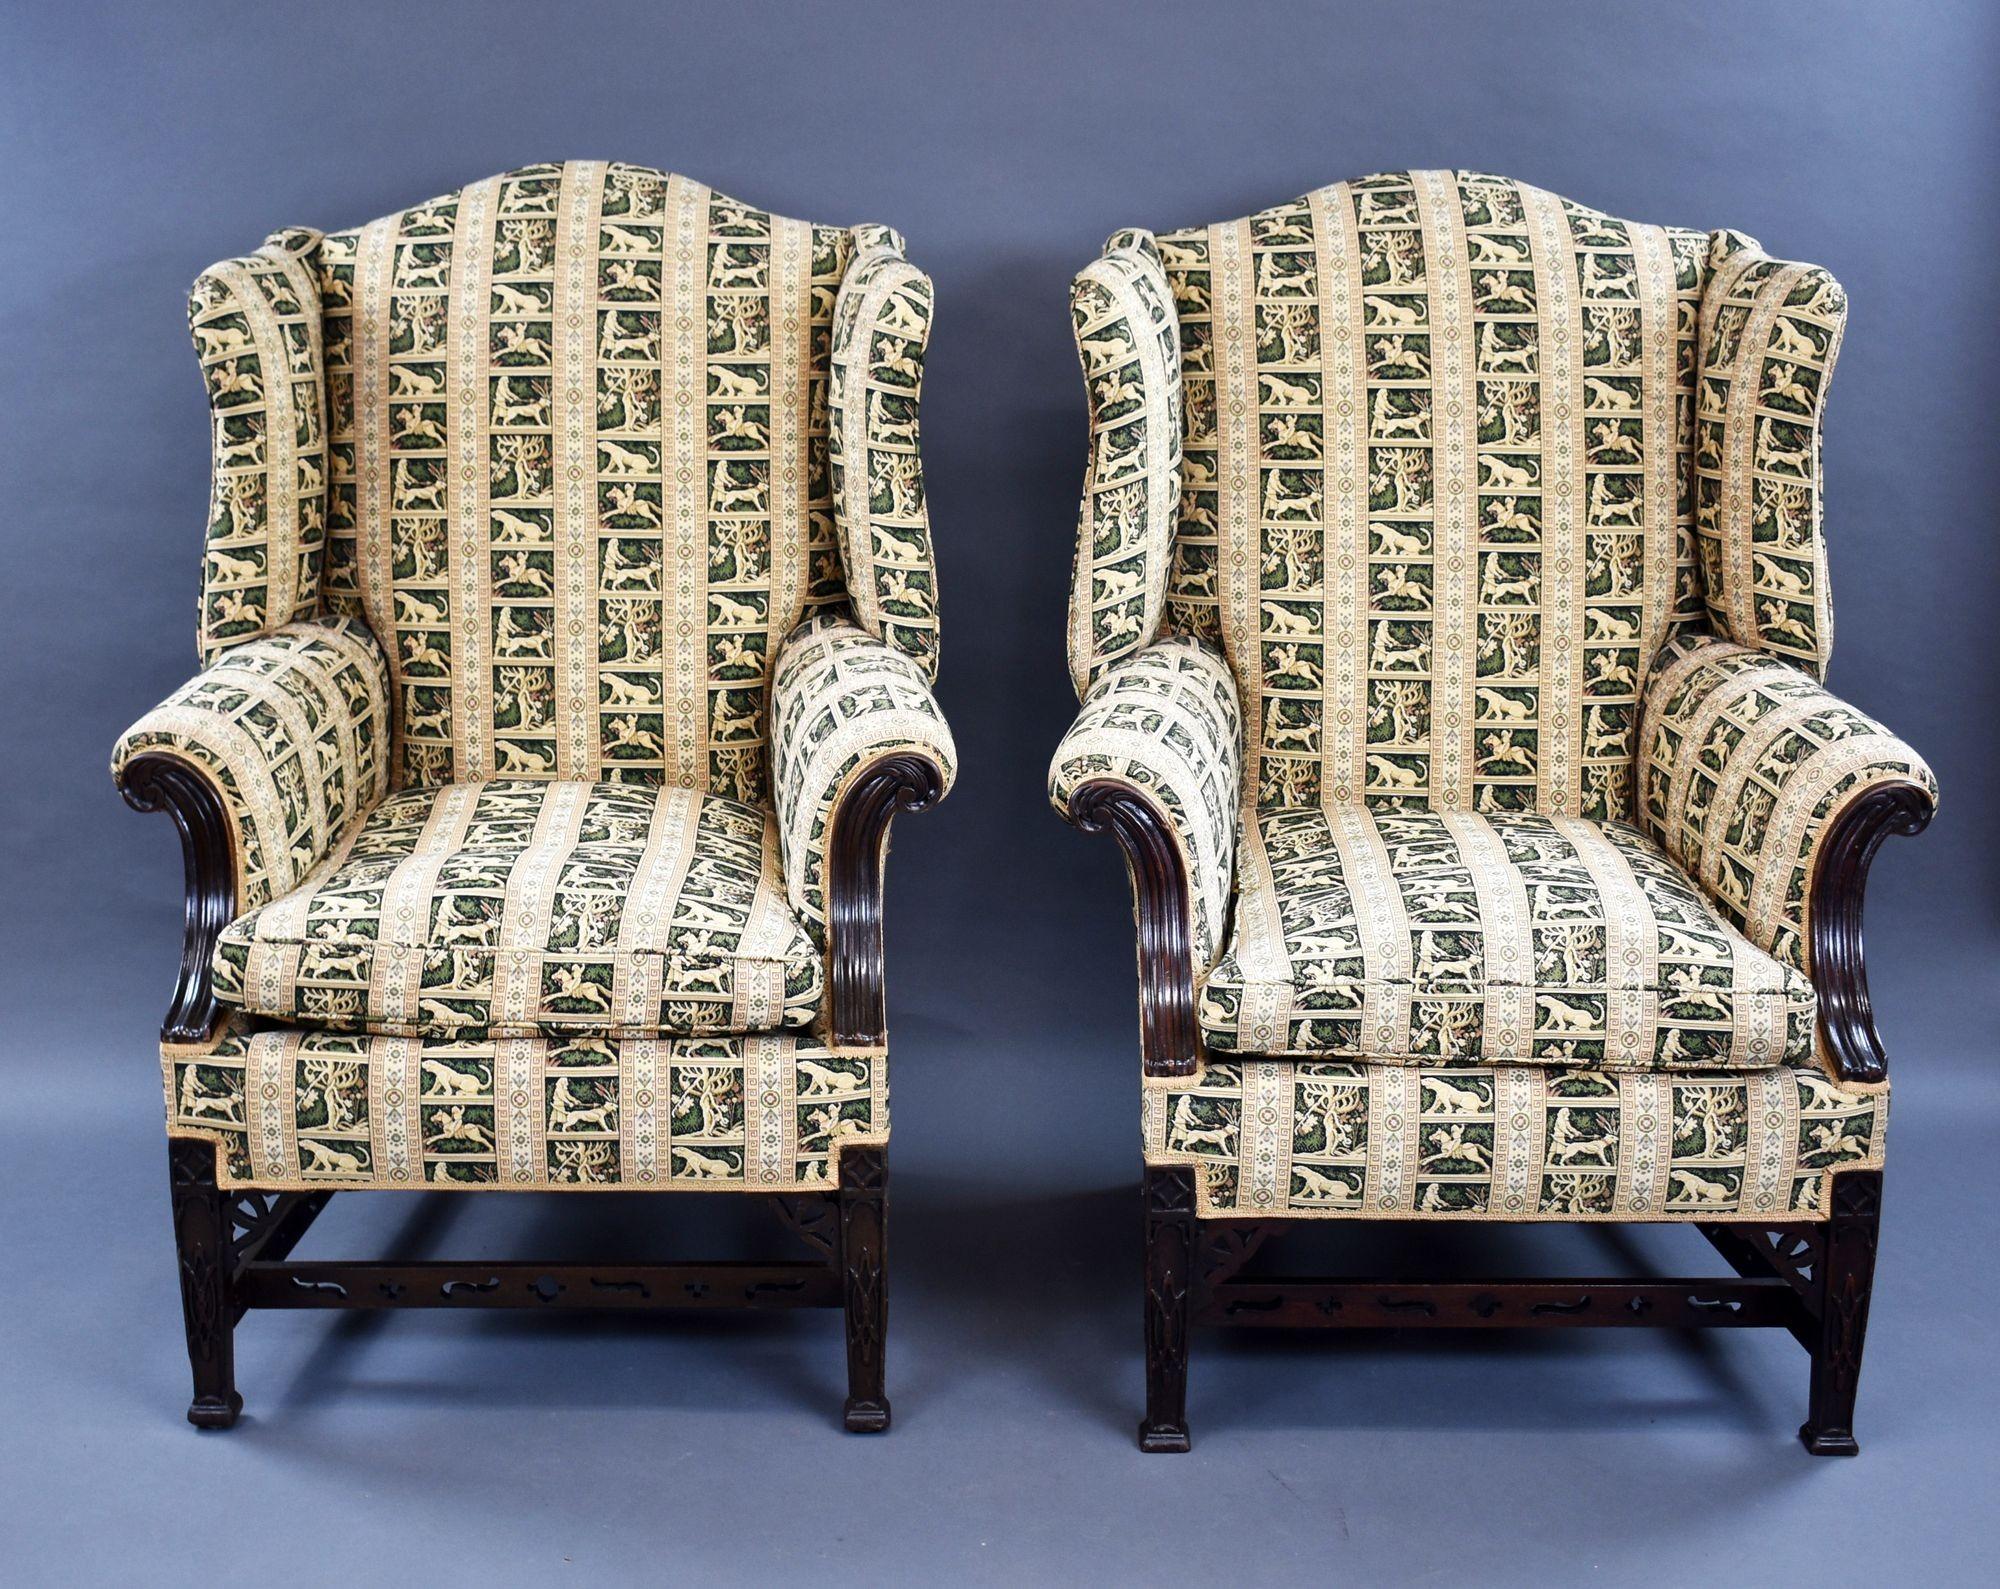 For sale is a good quality pair of Victorian mahogany Chippendale style wing back armchairs. Upholstered in a fine tapestry fabric, the chairs stand on carved Chippendale style legs united by stretchers. Both chairs are structurally sound and the